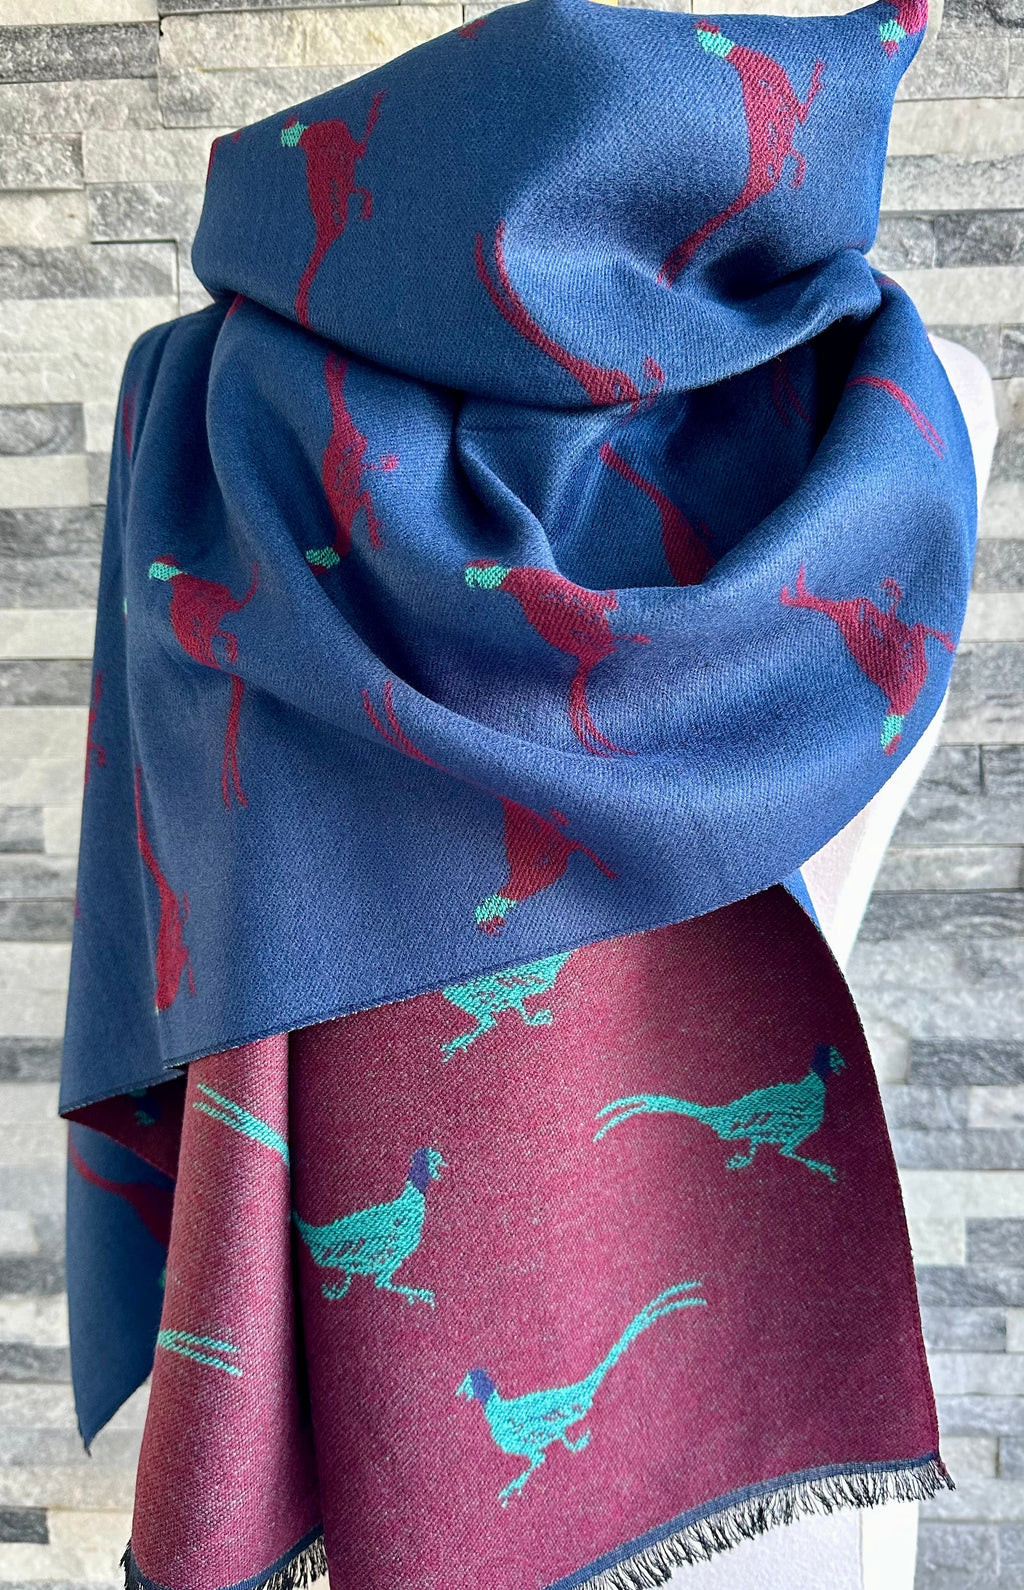 lusciousscarves Burgundy , Navy and Teal Reversible Scarf / Shawl With Pheasants Design